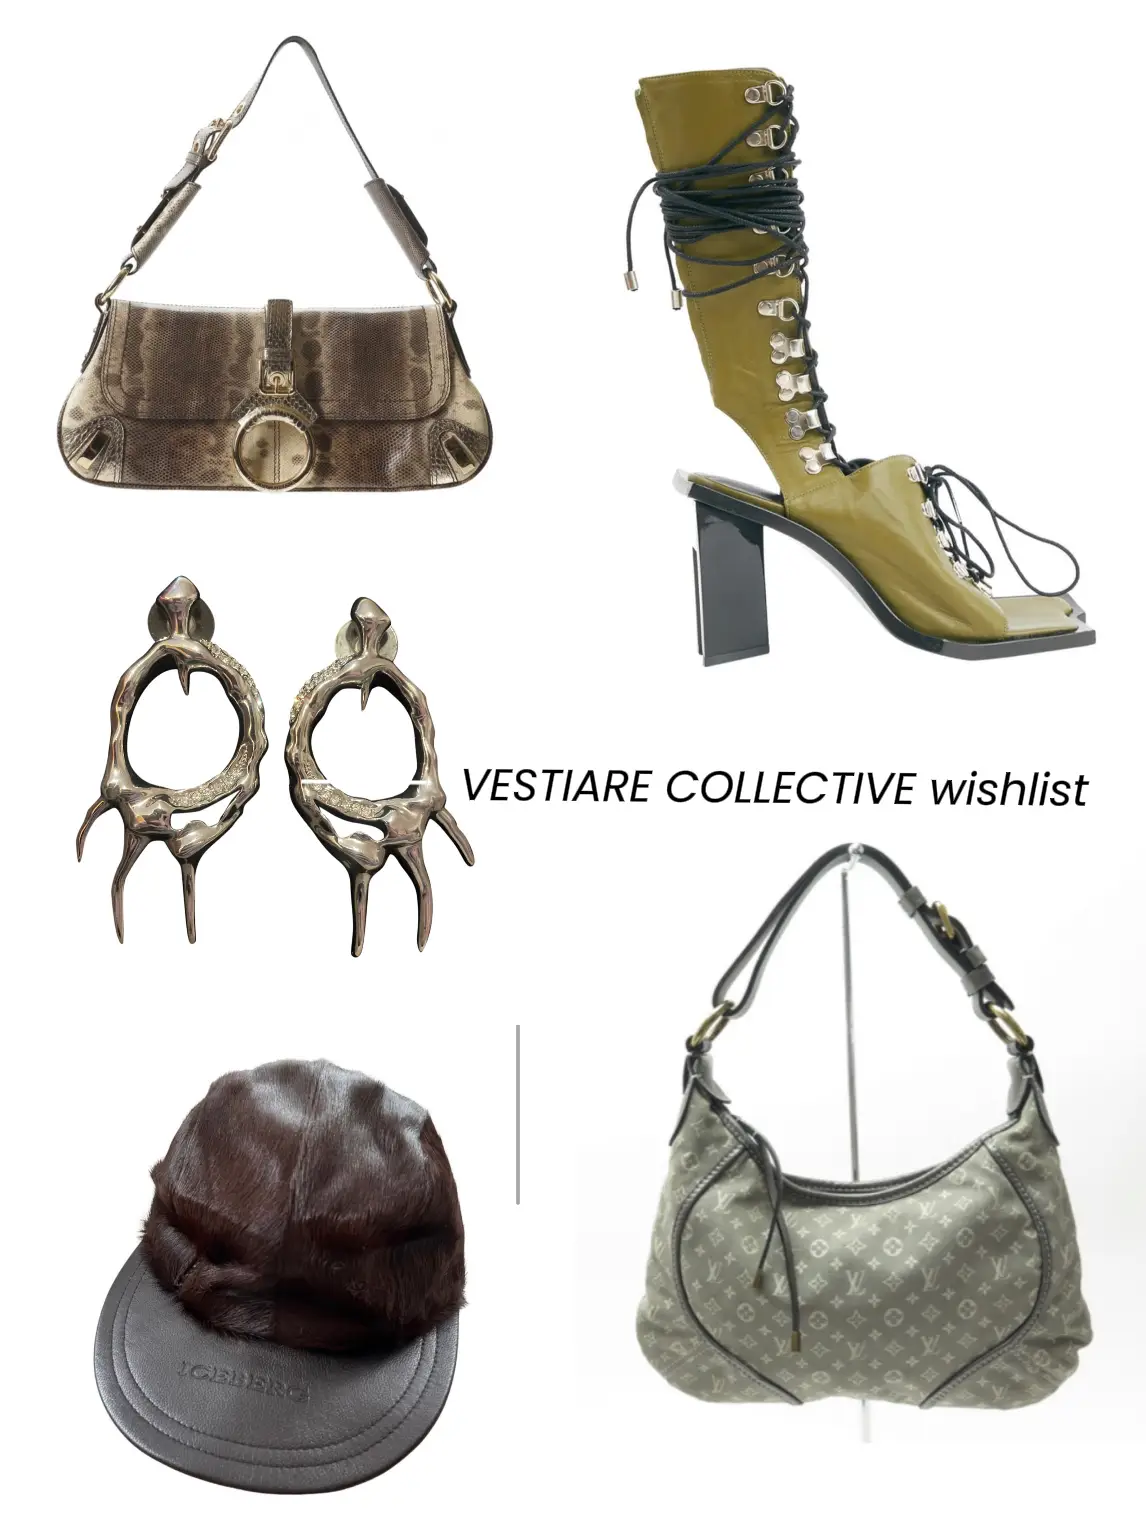 NEW BAG UNBOXING!!  Vestiaire Collective Unboxing & Review 